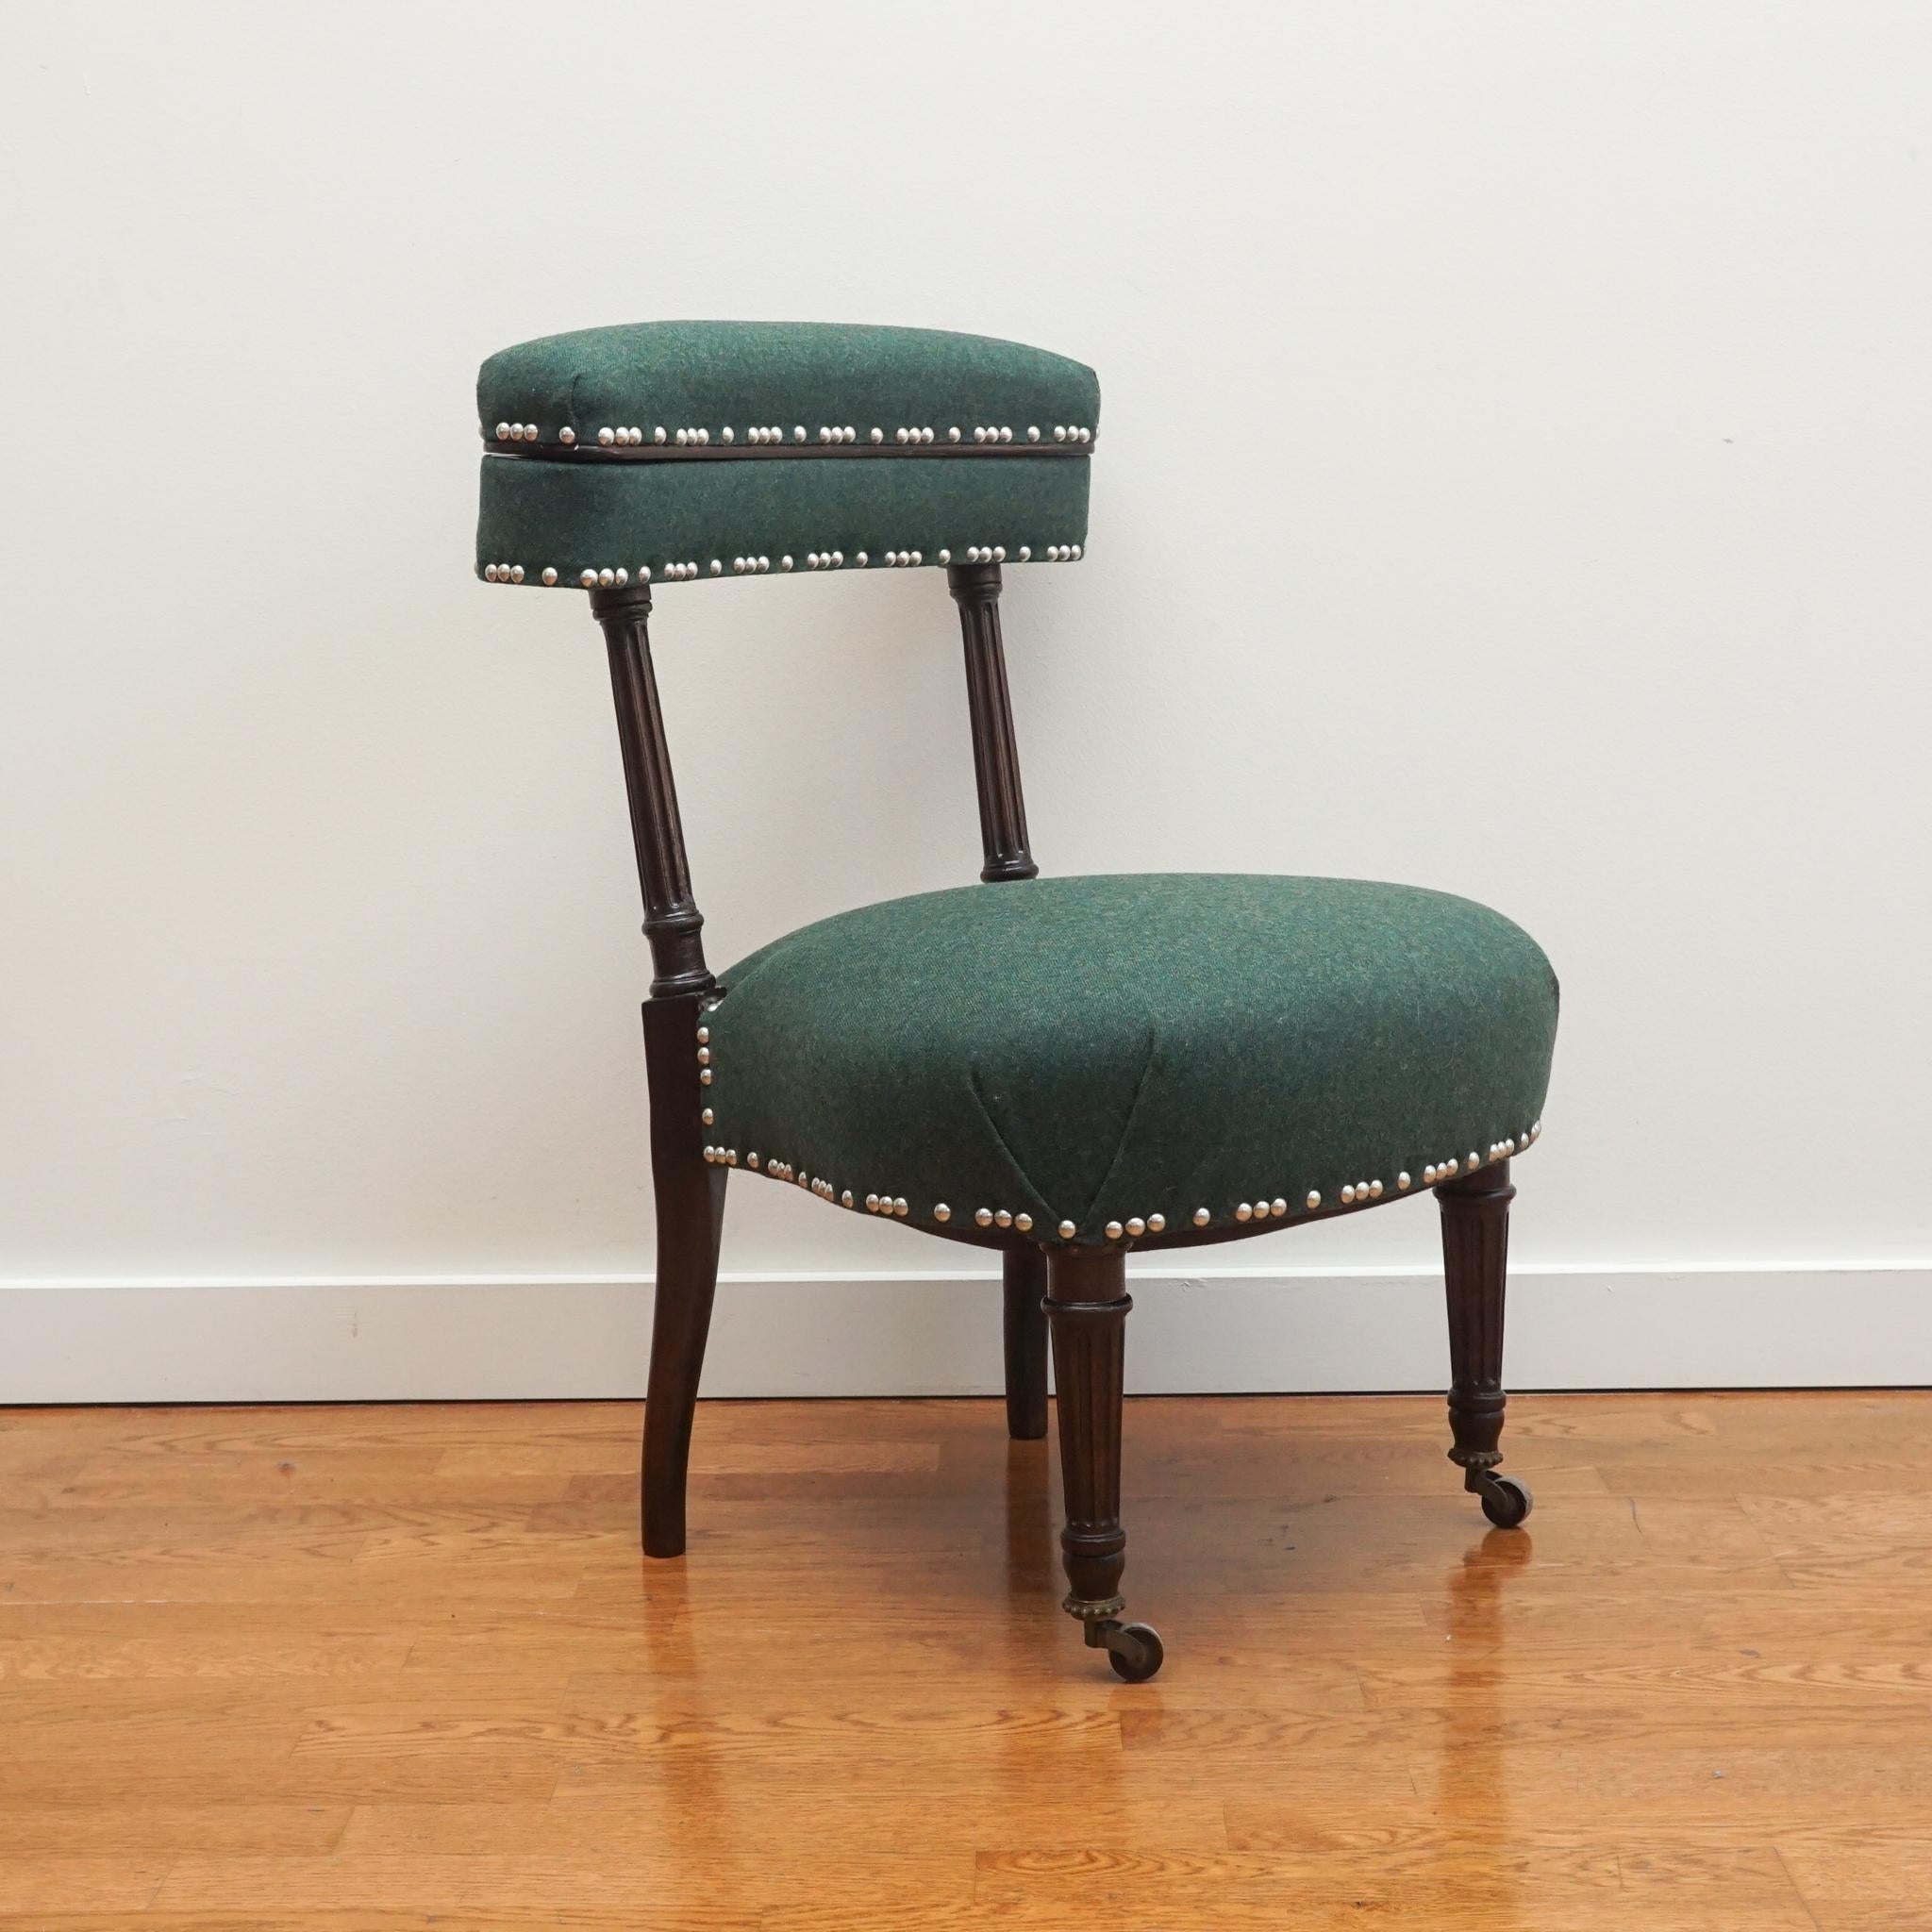 This sweet French Louis XVI-style valet chair has been completely restored. Featuring a rich dark wood finish, the chair is upholstered in a knit-backed green Coraggio Venetian wool/nylon blend fabric and finished with a semi-random polished nickel